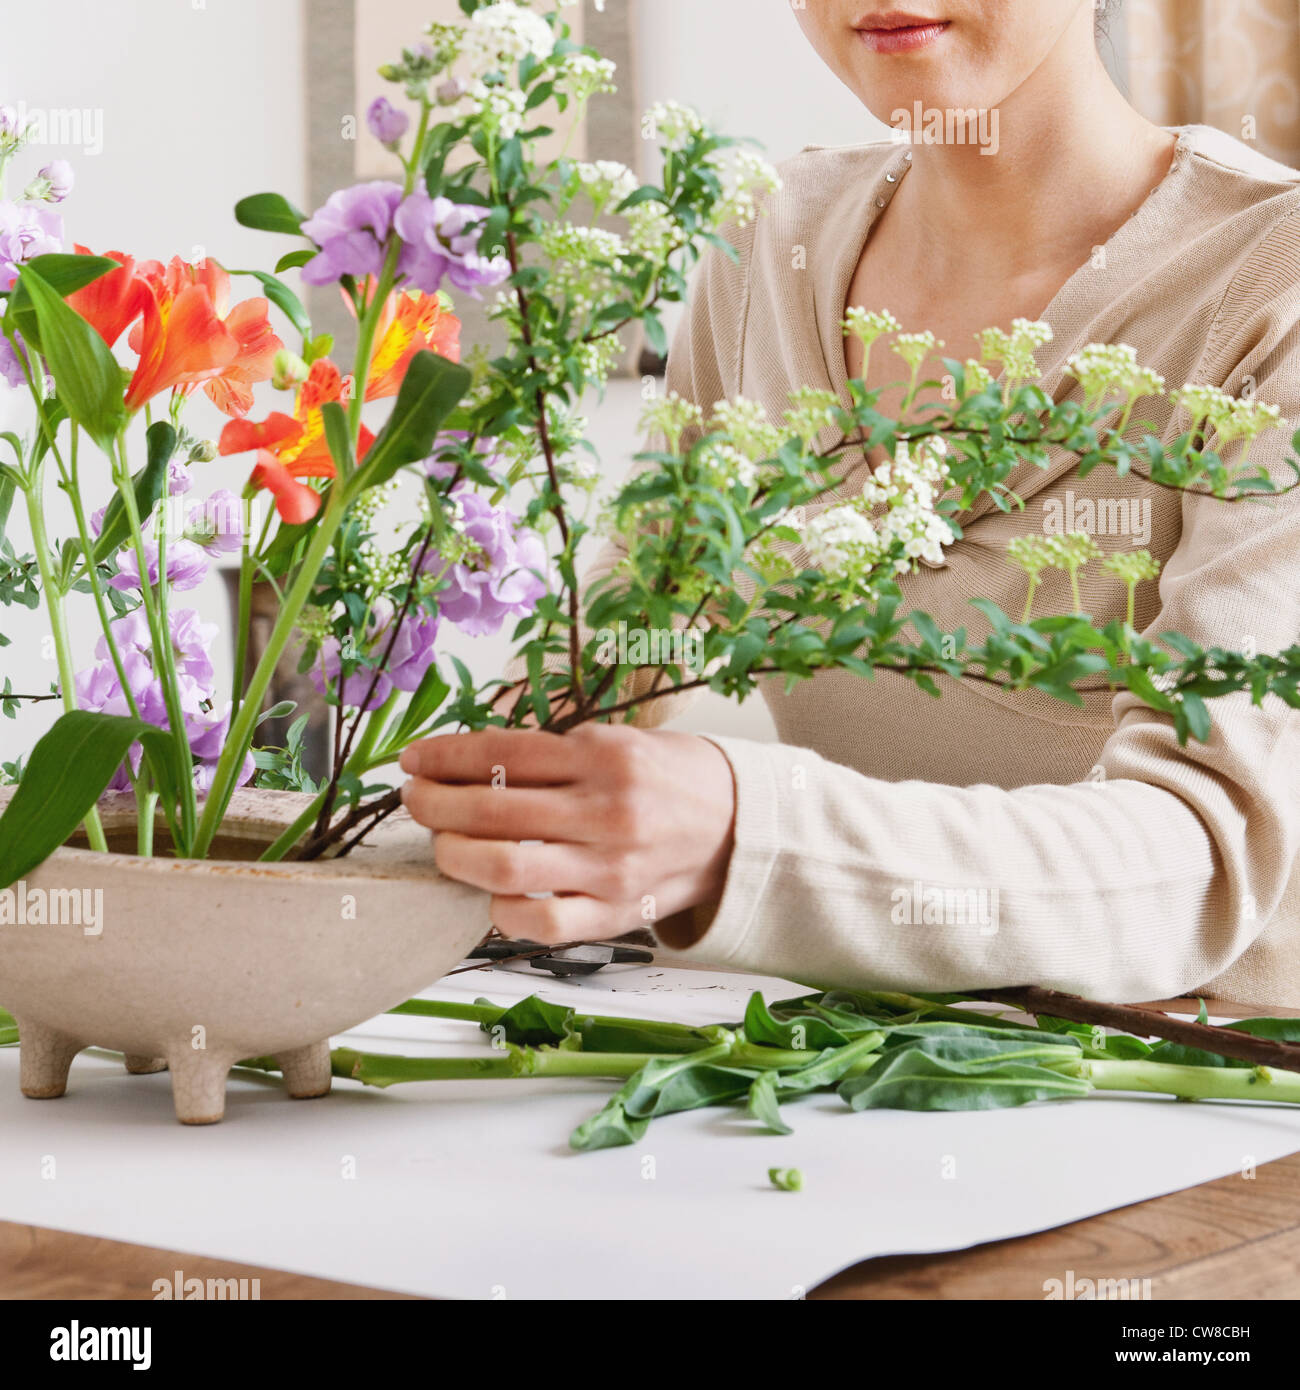 Woman Arranging Flowers In Pot Stock Photo